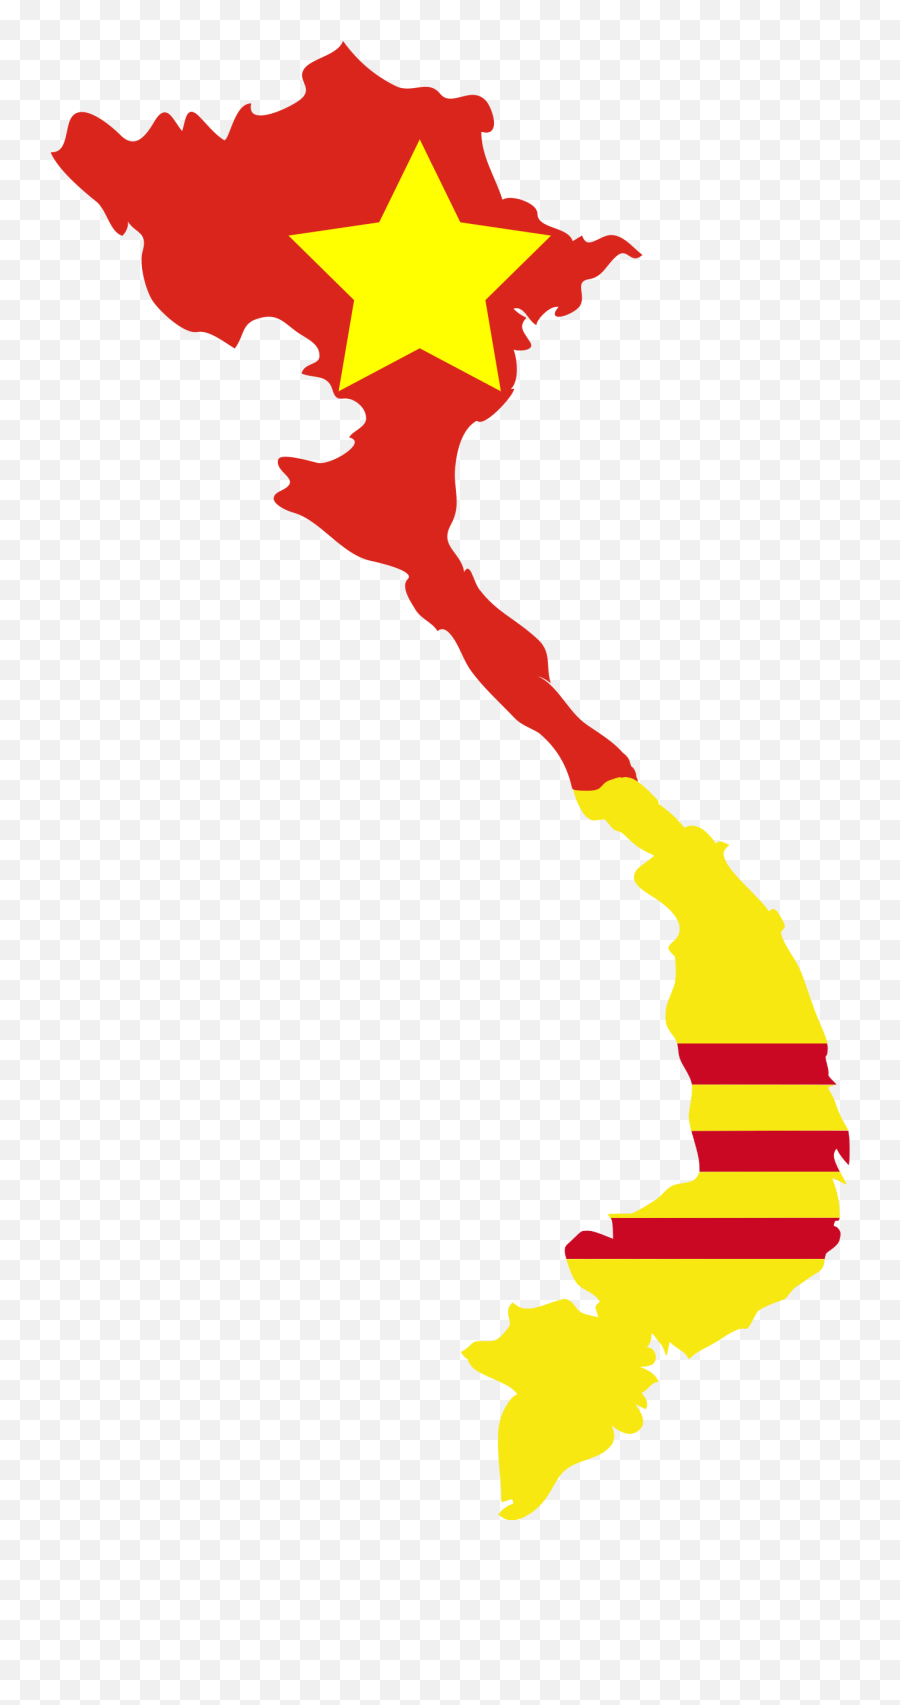 Fileflag Map Of North U0026 South Vietnampng - Wikimedia Commons Emoji,Thailand Flag Png